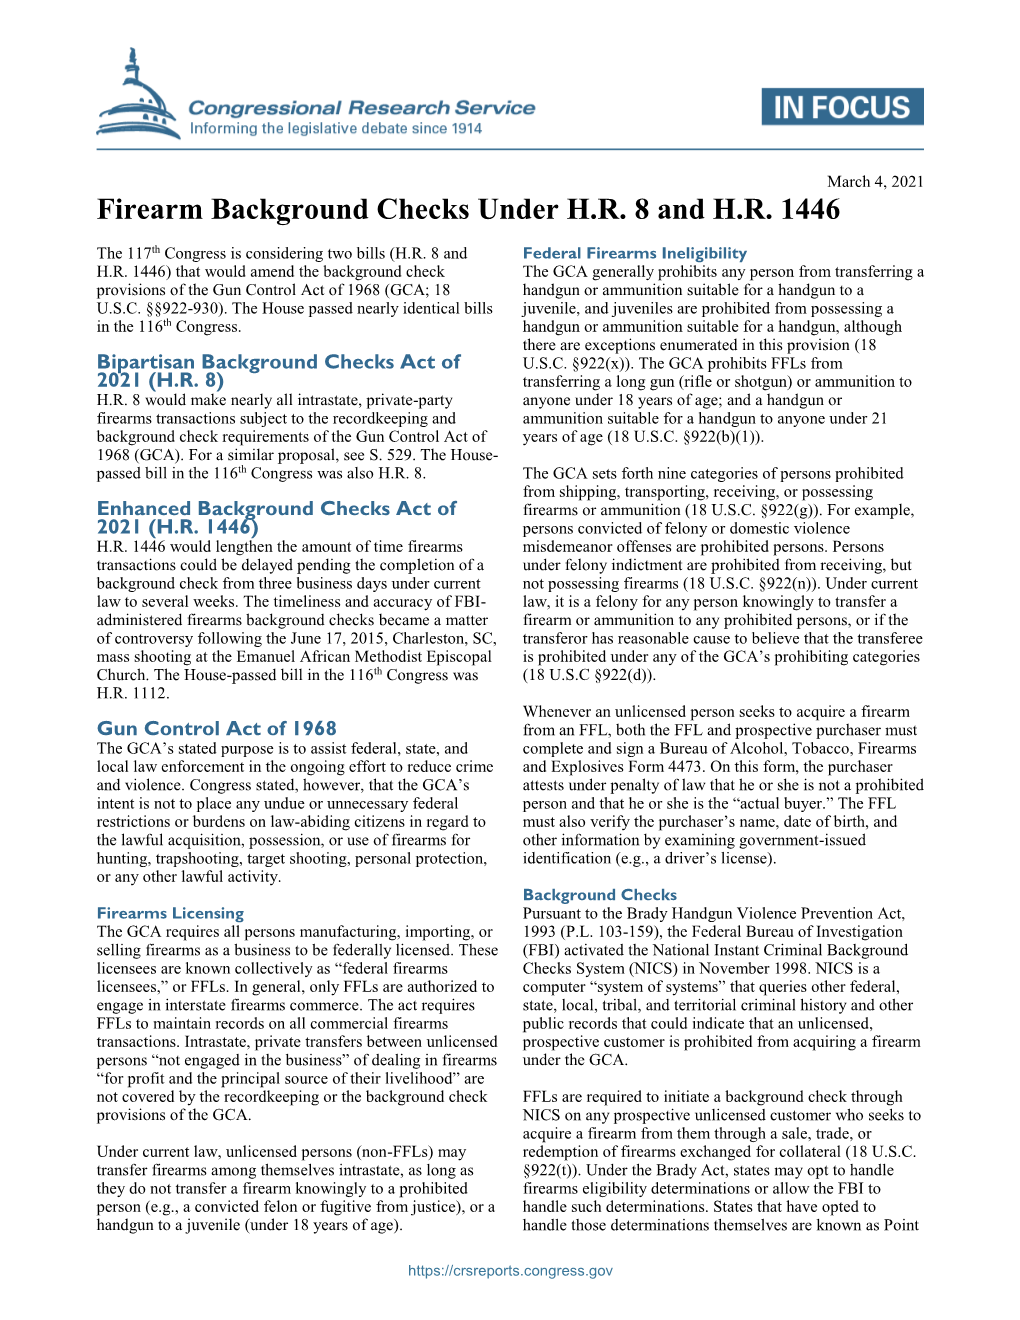 Firearm Background Checks Under H.R. 8 and H.R. 1446